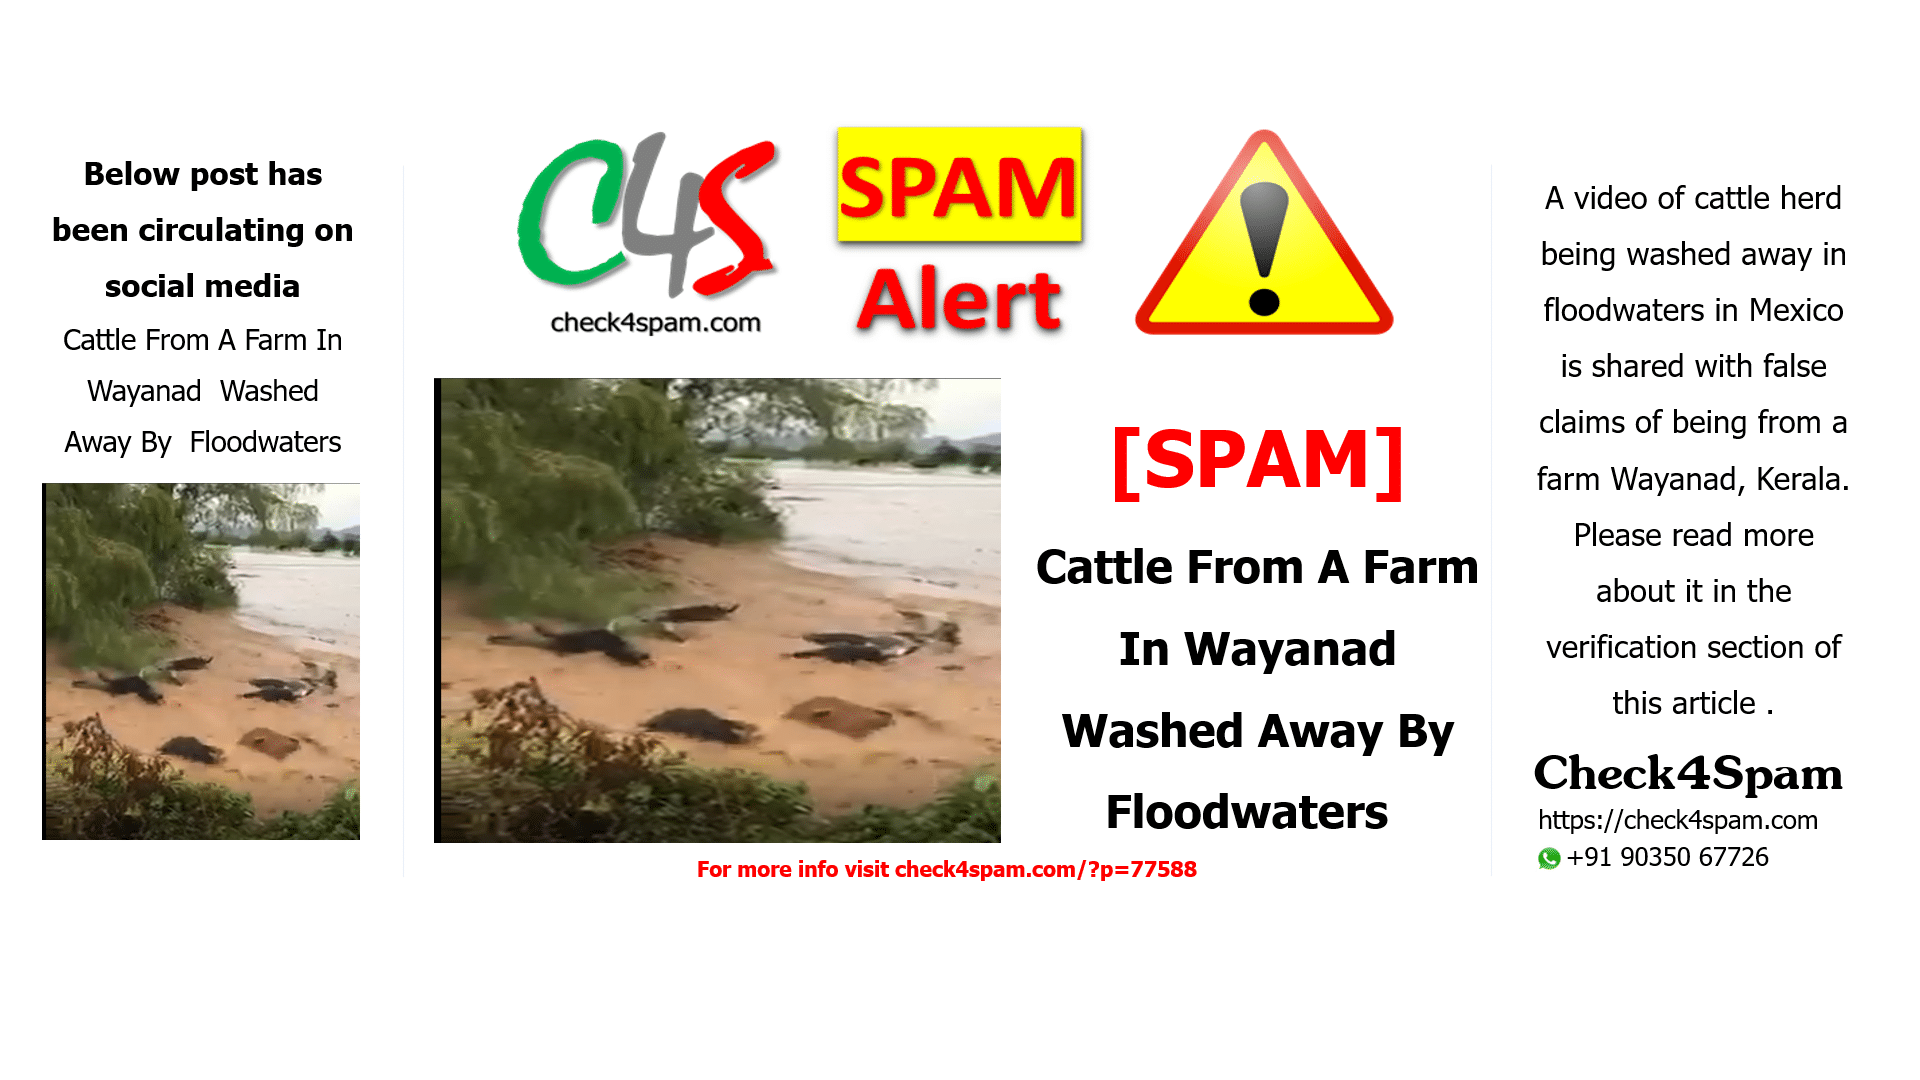 Cattle From A Farm In Wayanad Washed Away By Floodwaters